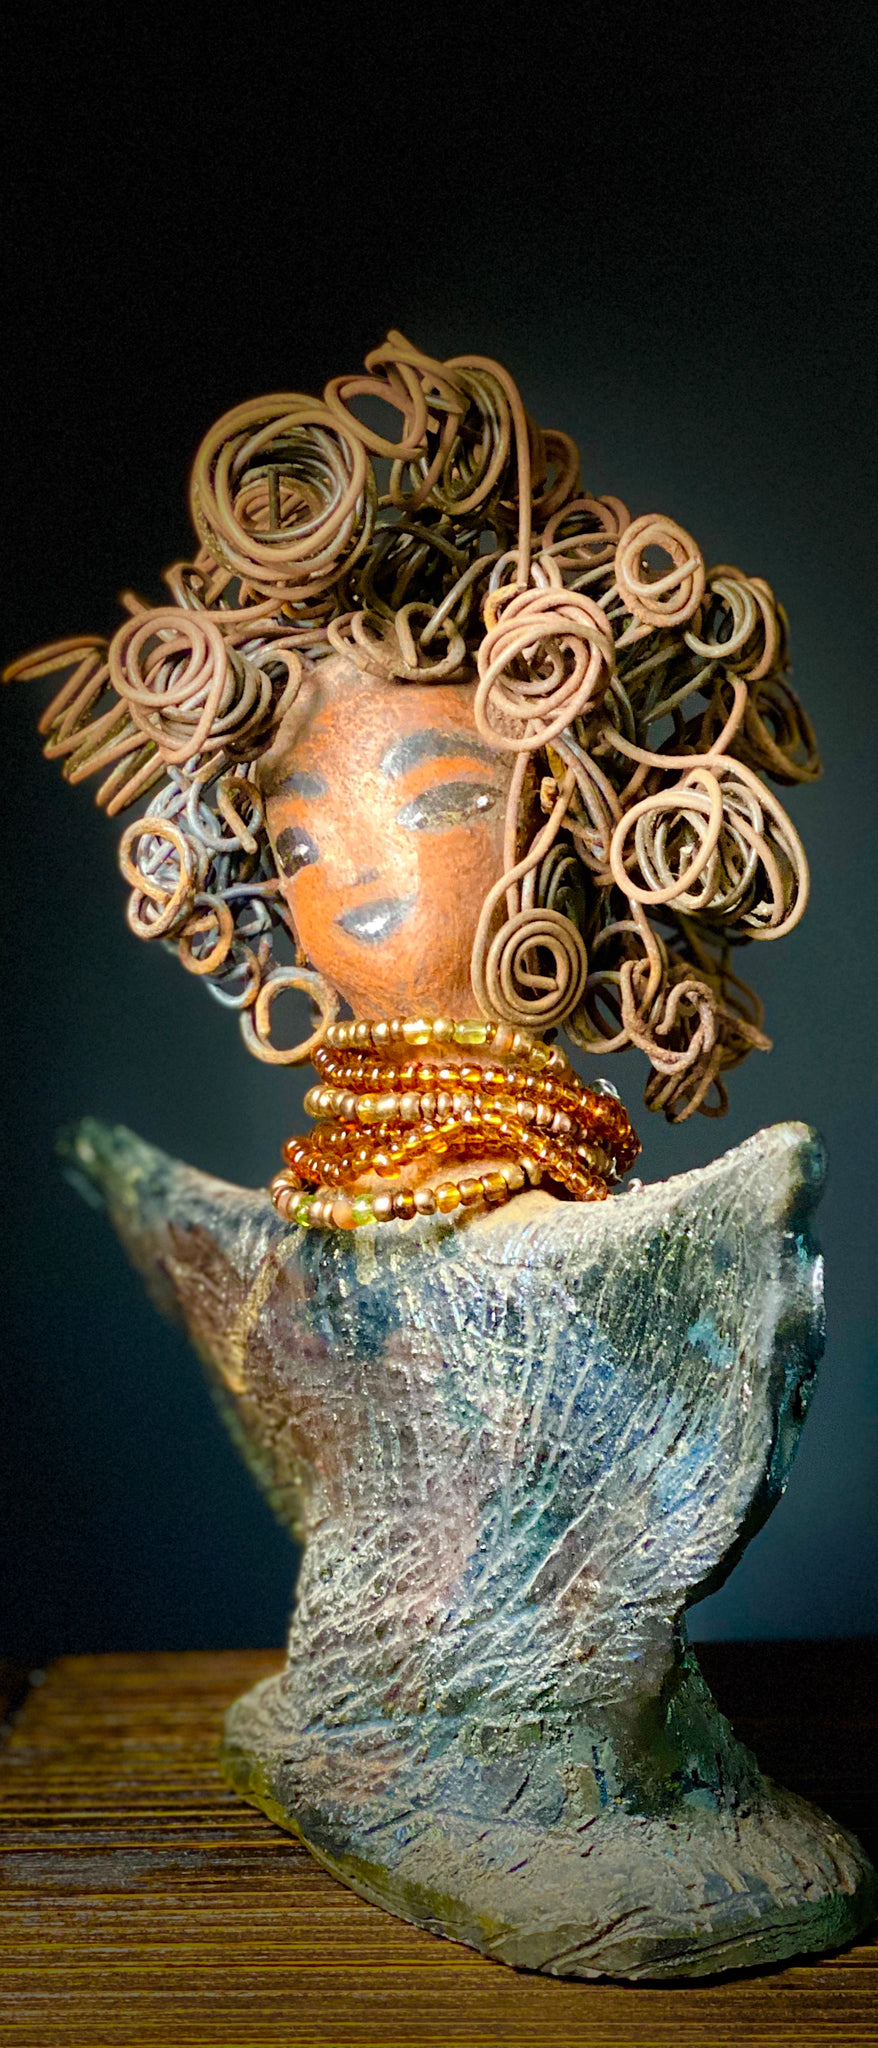 Lizzie Got Big Hair! Lizzie stands 8" x 7" x  2.5" and weighs 1 lb. Her robe is textured with a multicolored metallic copper glaze. Lizzie has really Big Hair. The hair is over 25 feet of curly 16 gauge wire. Her complexion is a lovely cocoa brown. Lizzie has an angelic pose with her arms up in adoration. Give Lizzie a specail place in your home!